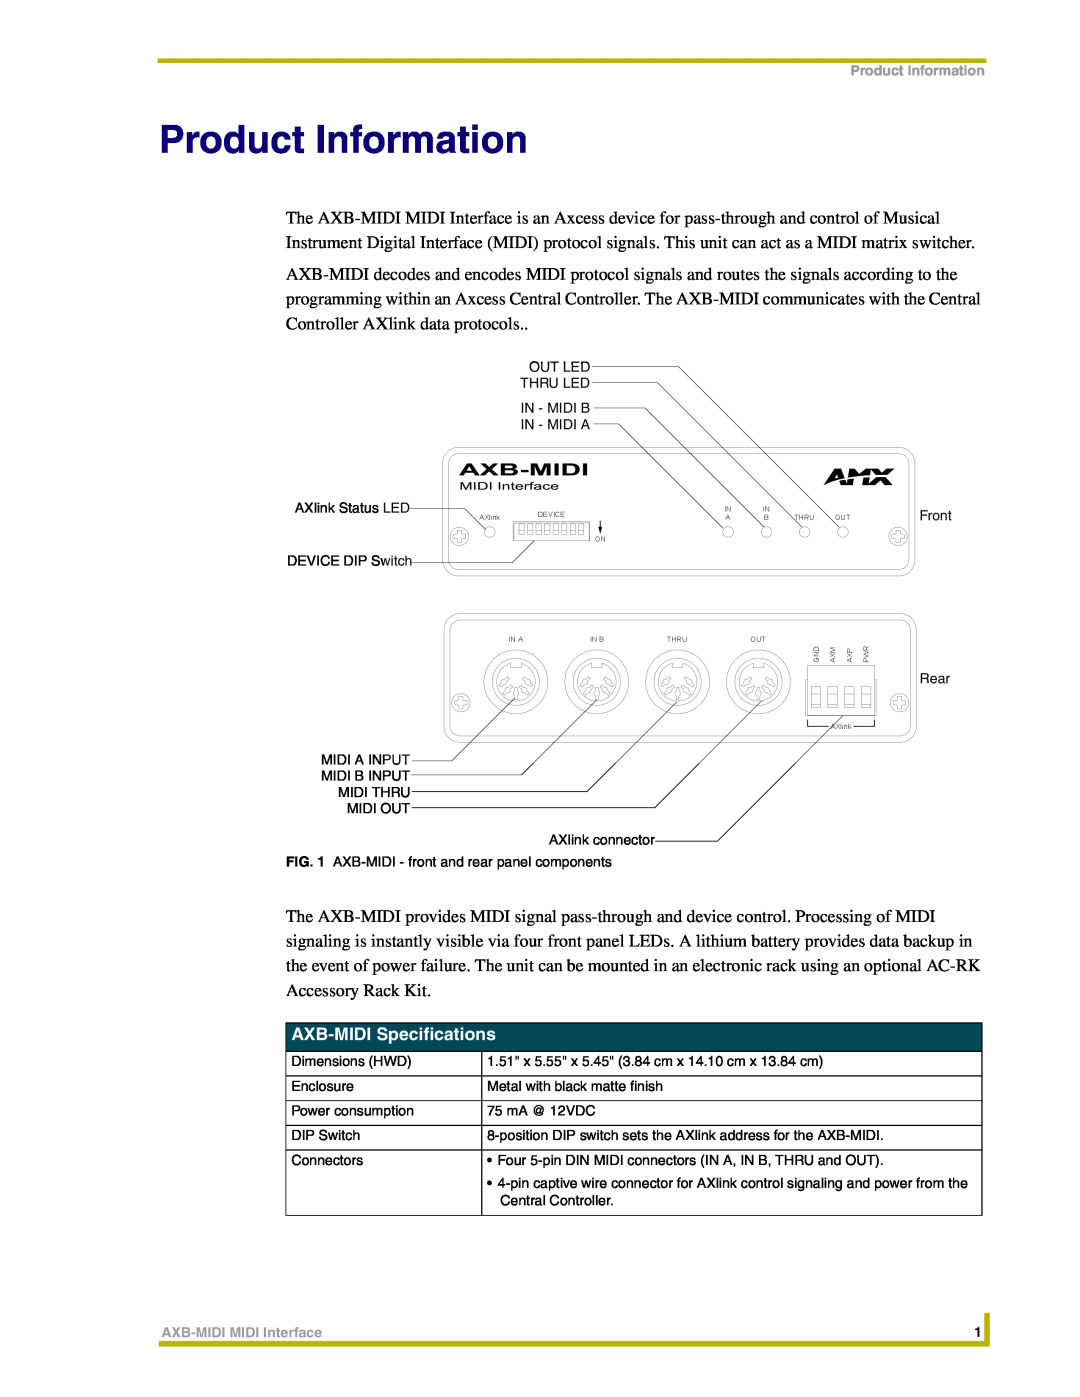 AMX instruction manual Product Information, AXB-MIDI Specifications 